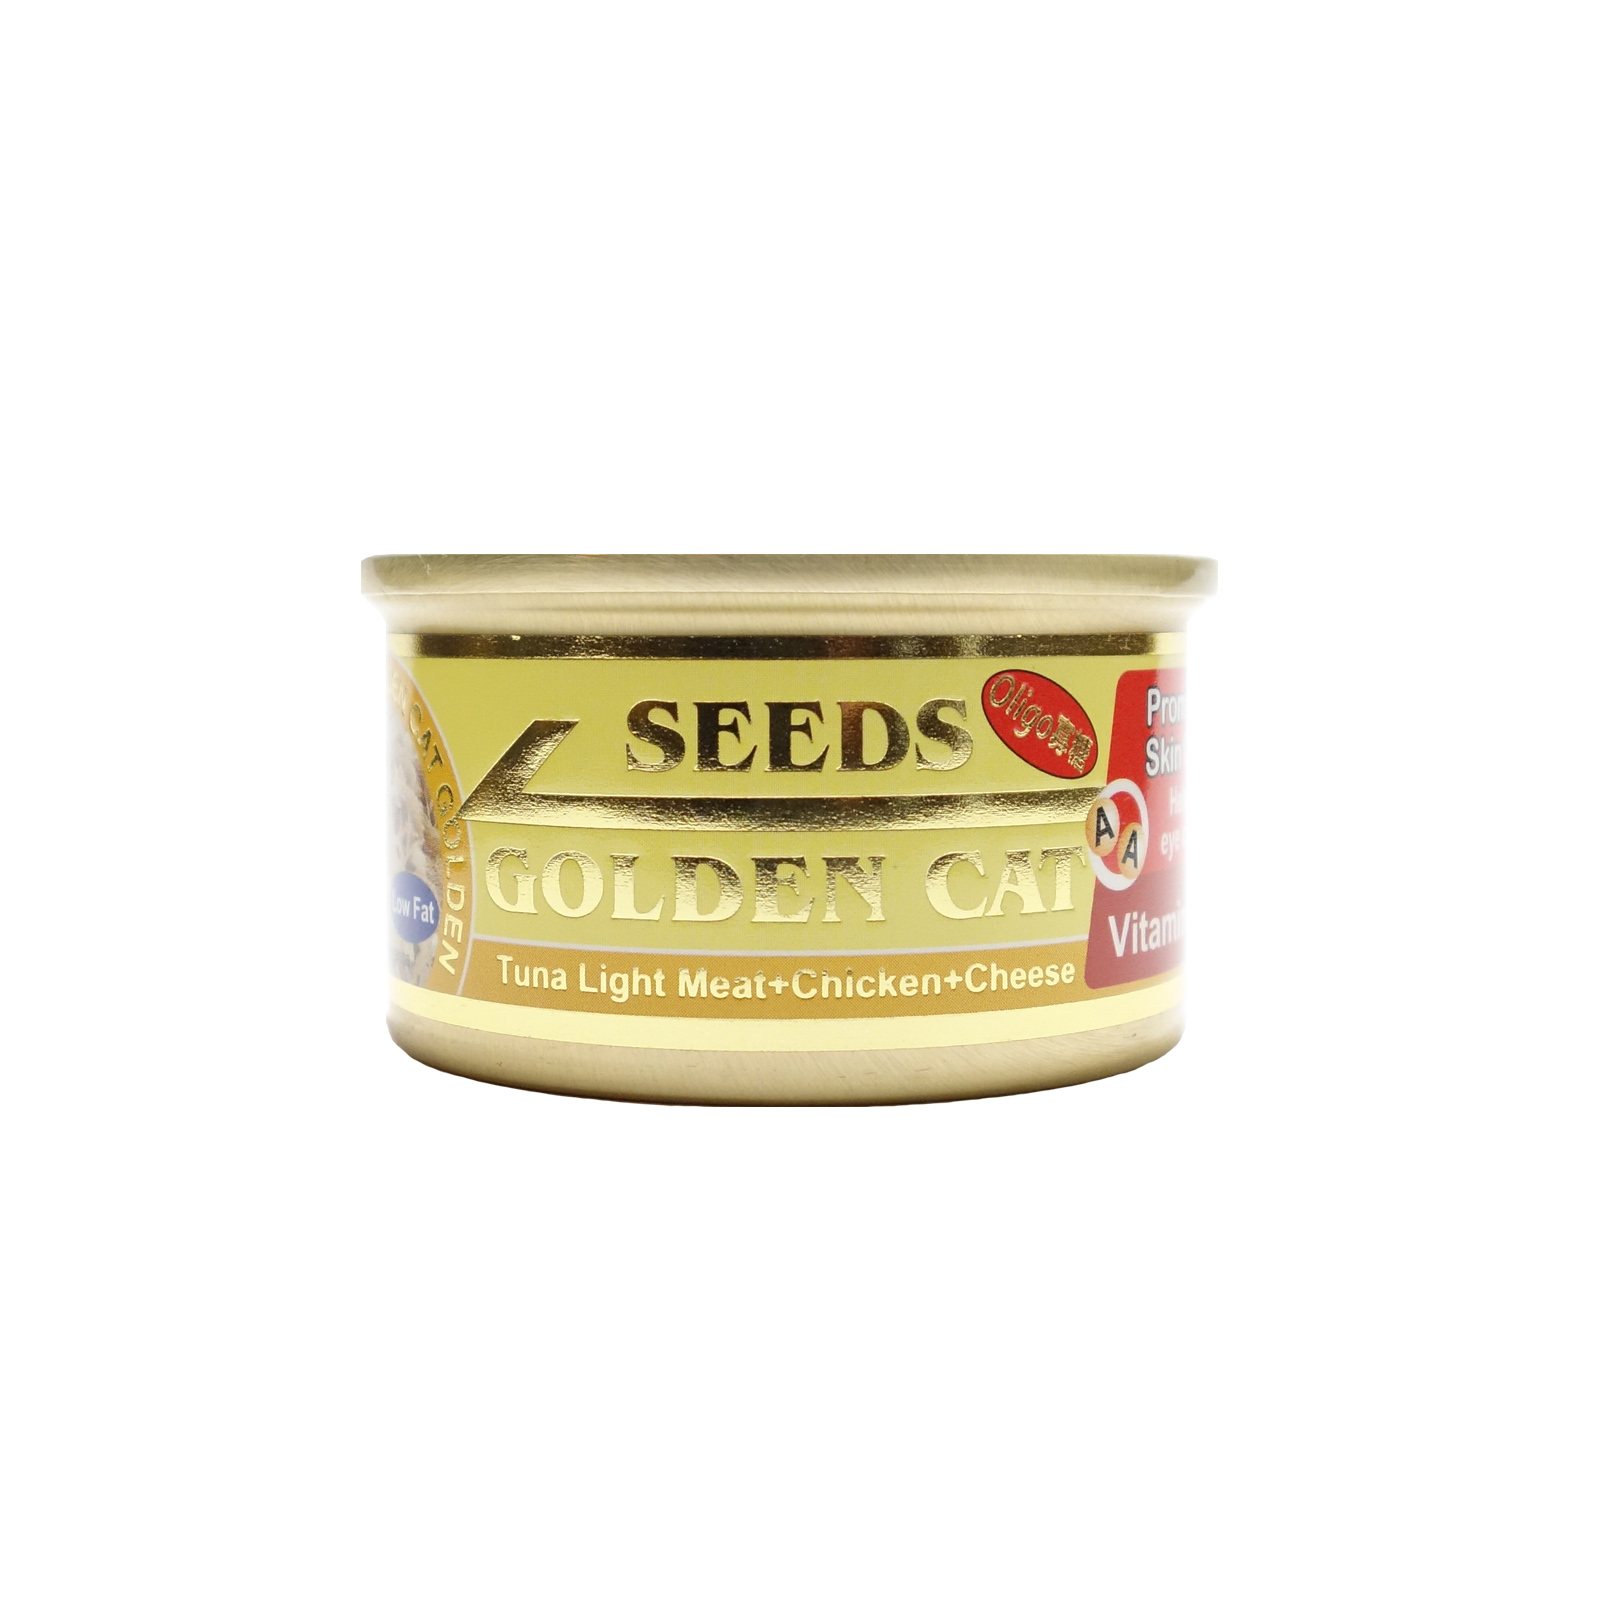 Golden Cat Tuna Light Meat and Chicken  and Cheese 80g